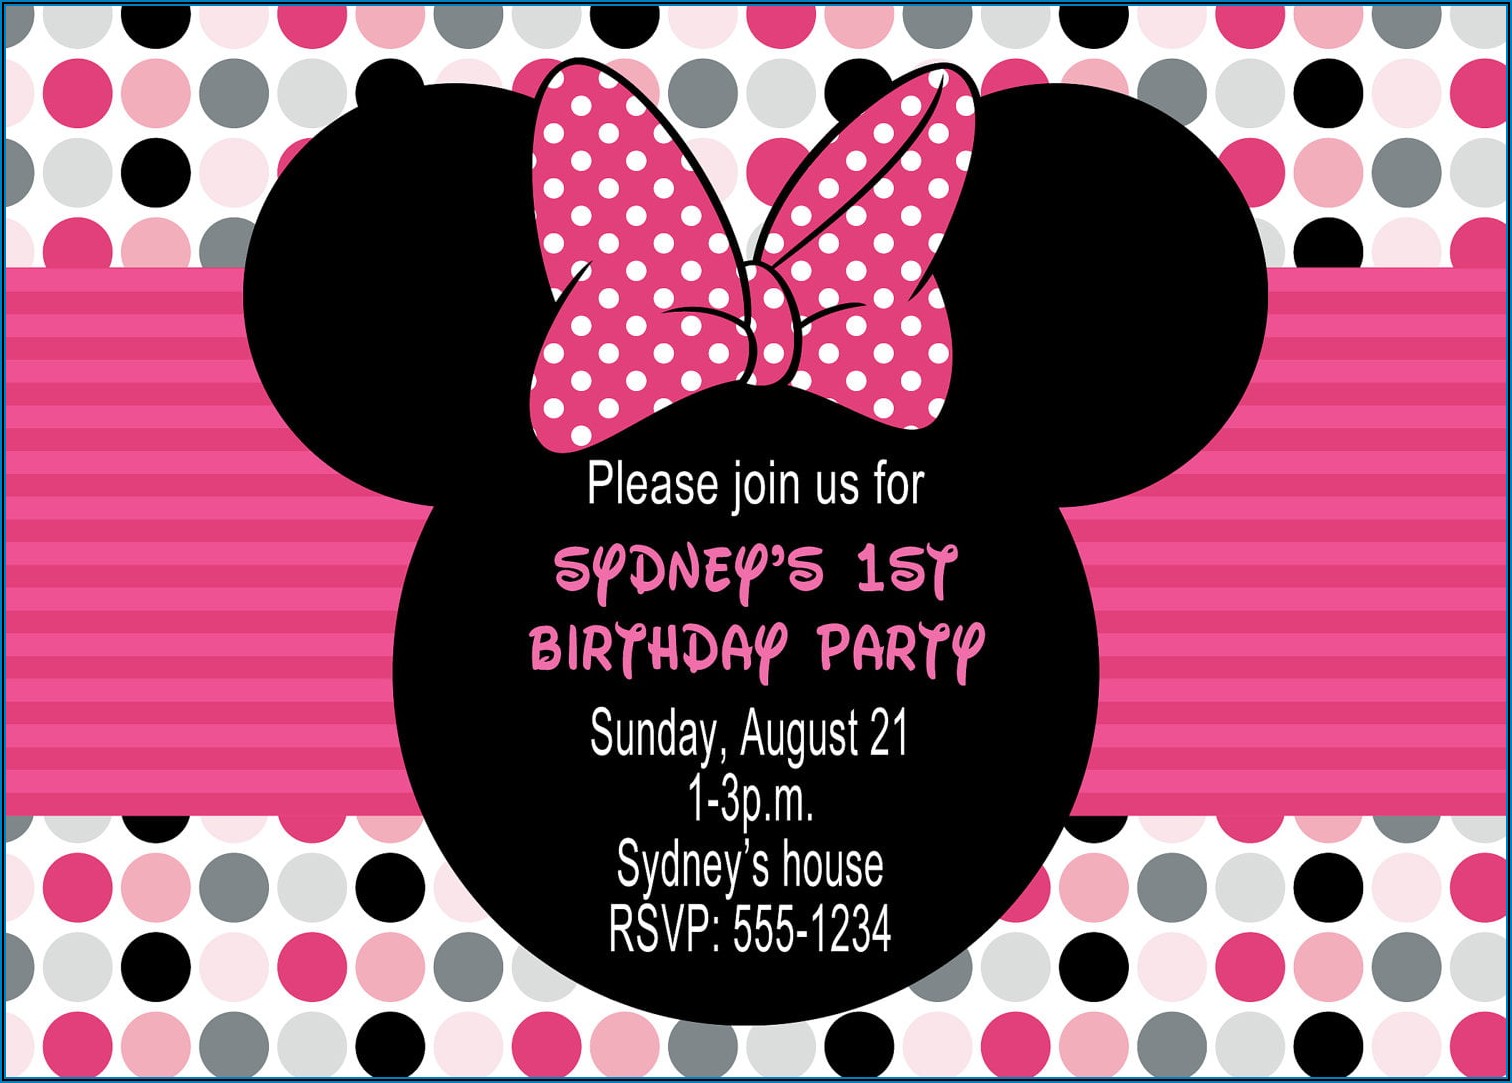 Personalized Mickey Mouse 1st Birthday Invitations